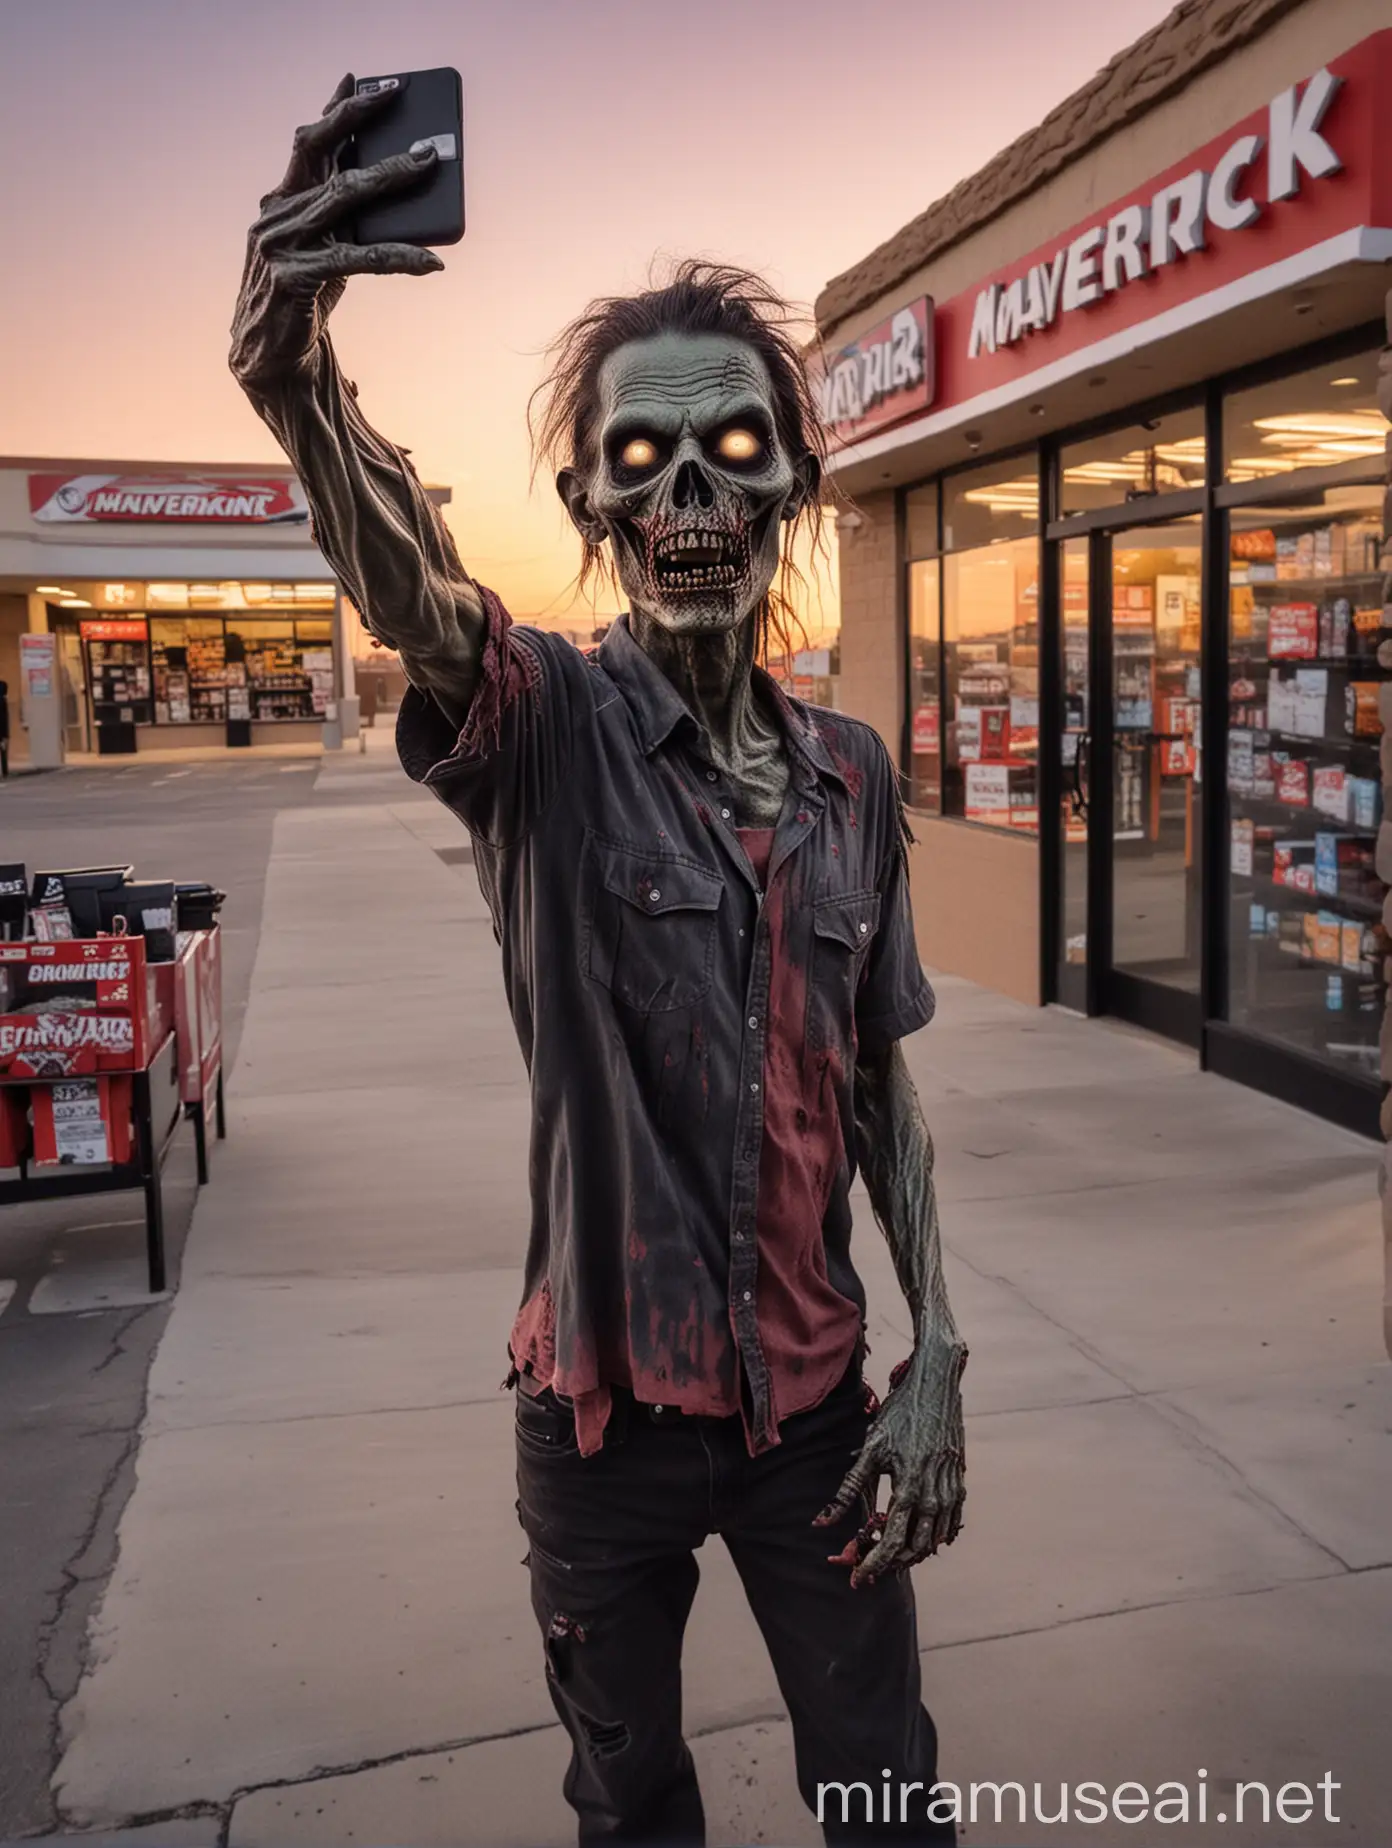 zombie taking a selfie at a Maverik convenience store at sunset